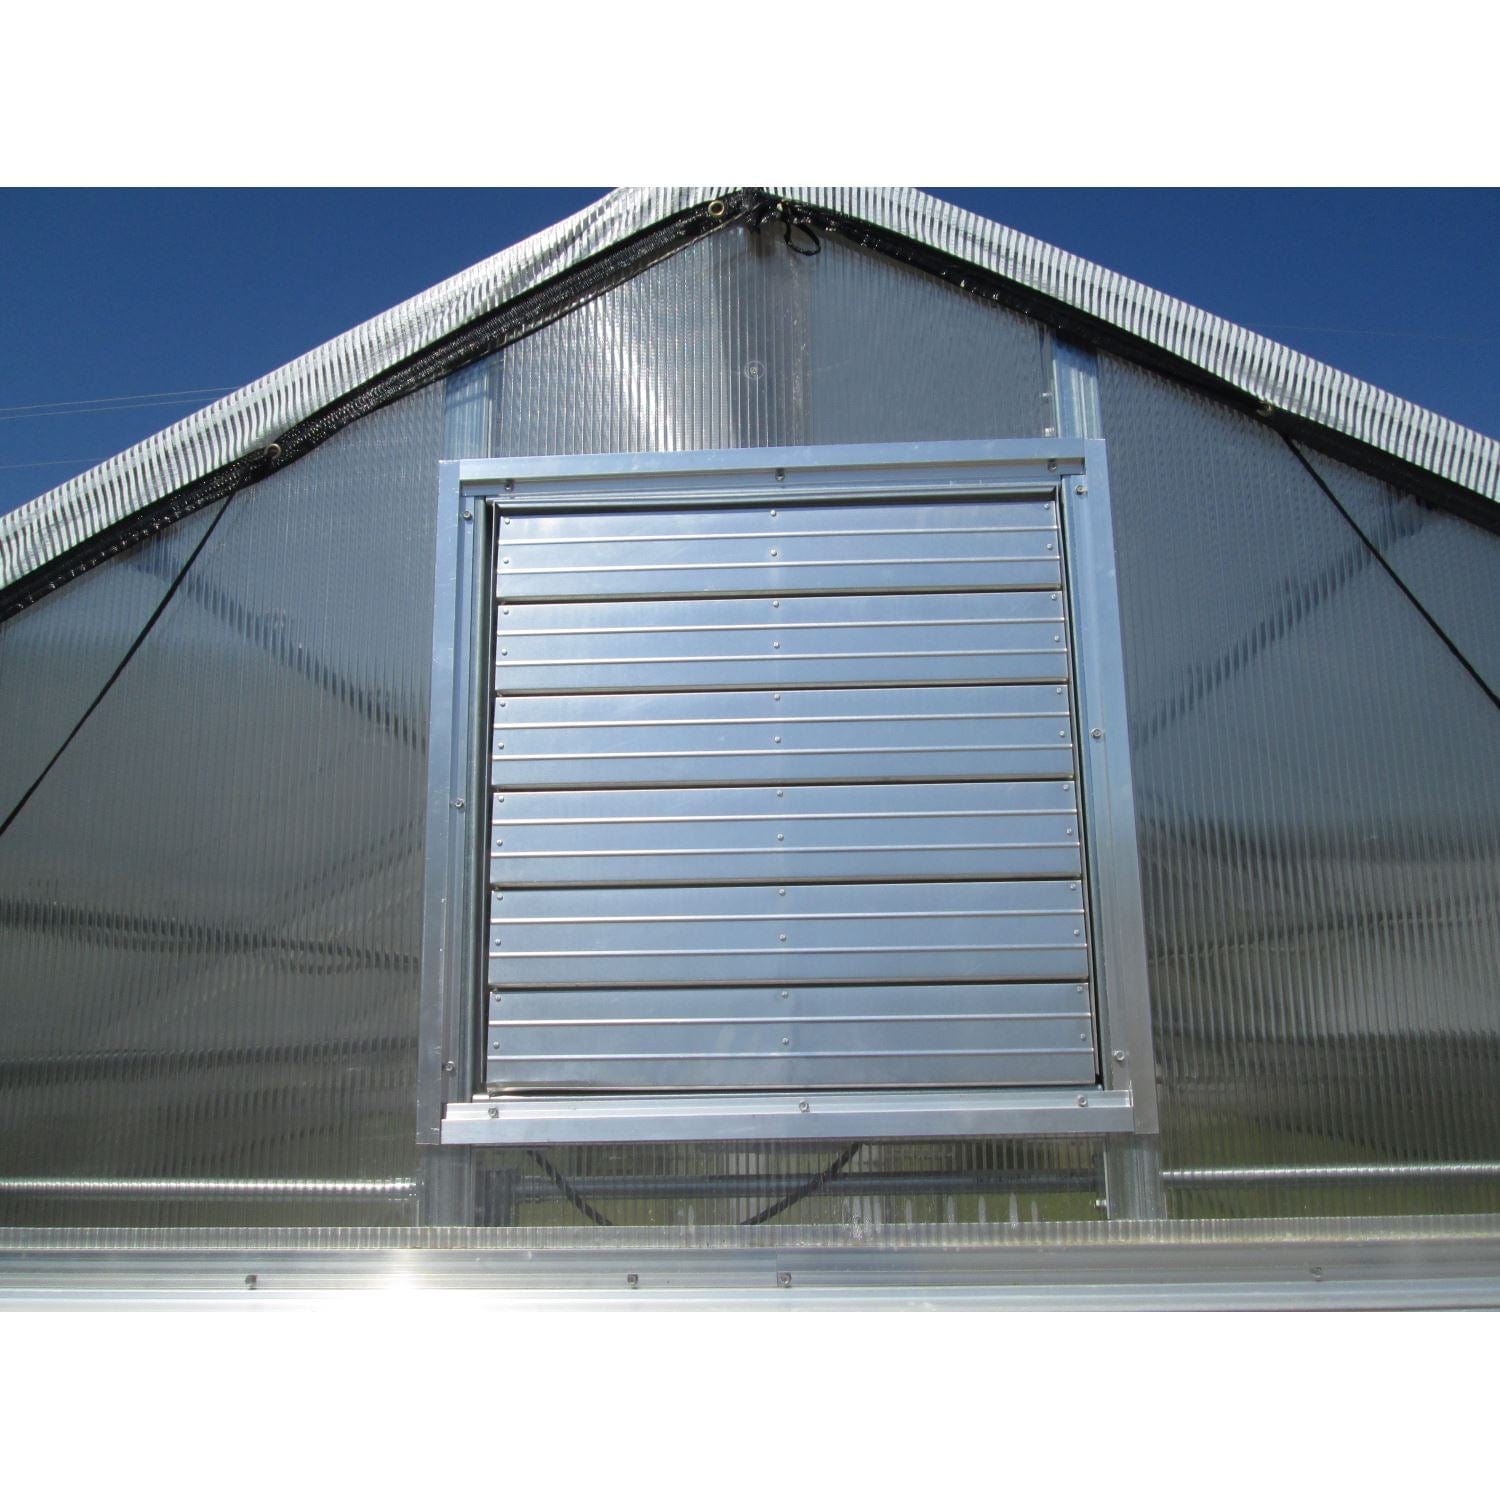 Riverstone Industries Deluxe Greenhouse Kit Riverstone | Whitney - Premium Grower's Edition - 12FT x 18FT Educational Greenhouse Kit With 8FT High Walls R12188-PG